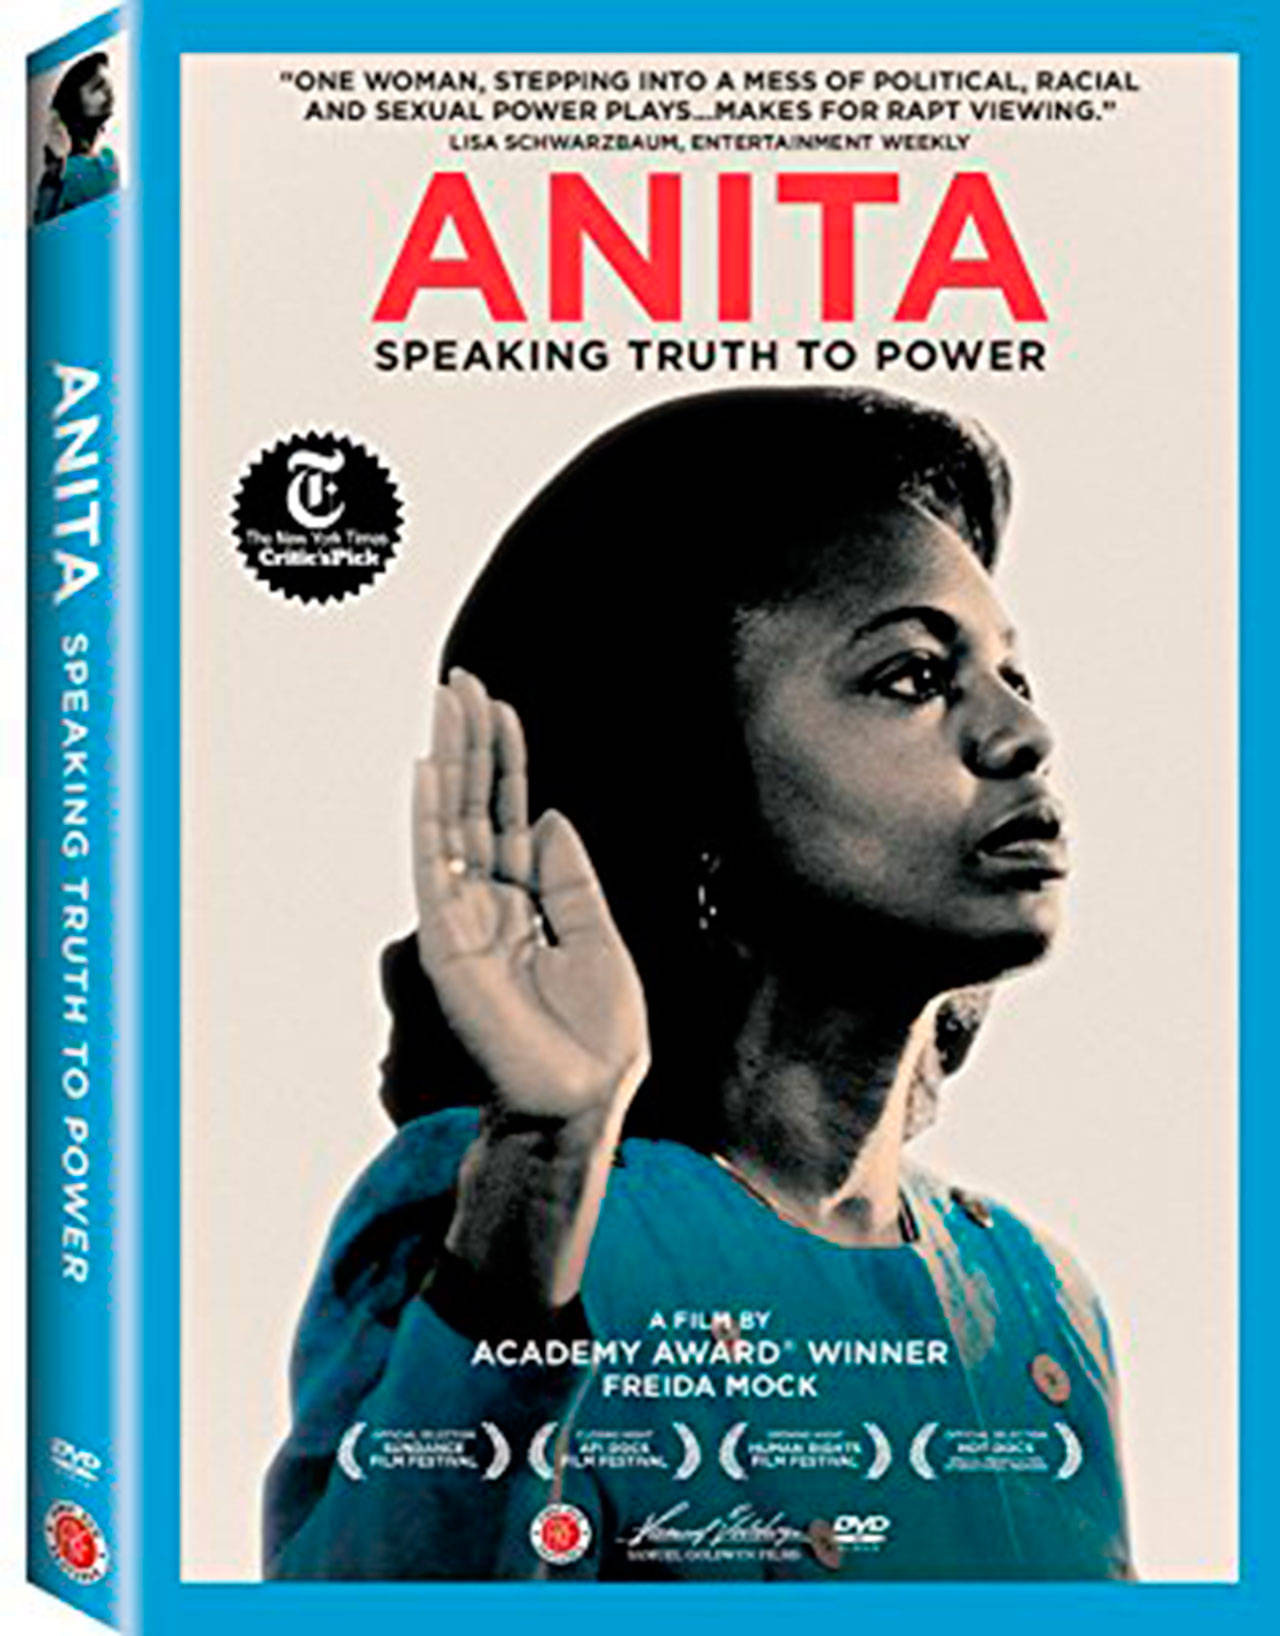 Courtesy image | In honor of International Women’s Day, Free Range Films will present “Anita: Speaking Truth to Power,” a timely and powerful film about Anita Hill, at 3 p.m. Sunday, March 11 at Ground Zero (16159 Clear Creek, in Poulsbo).